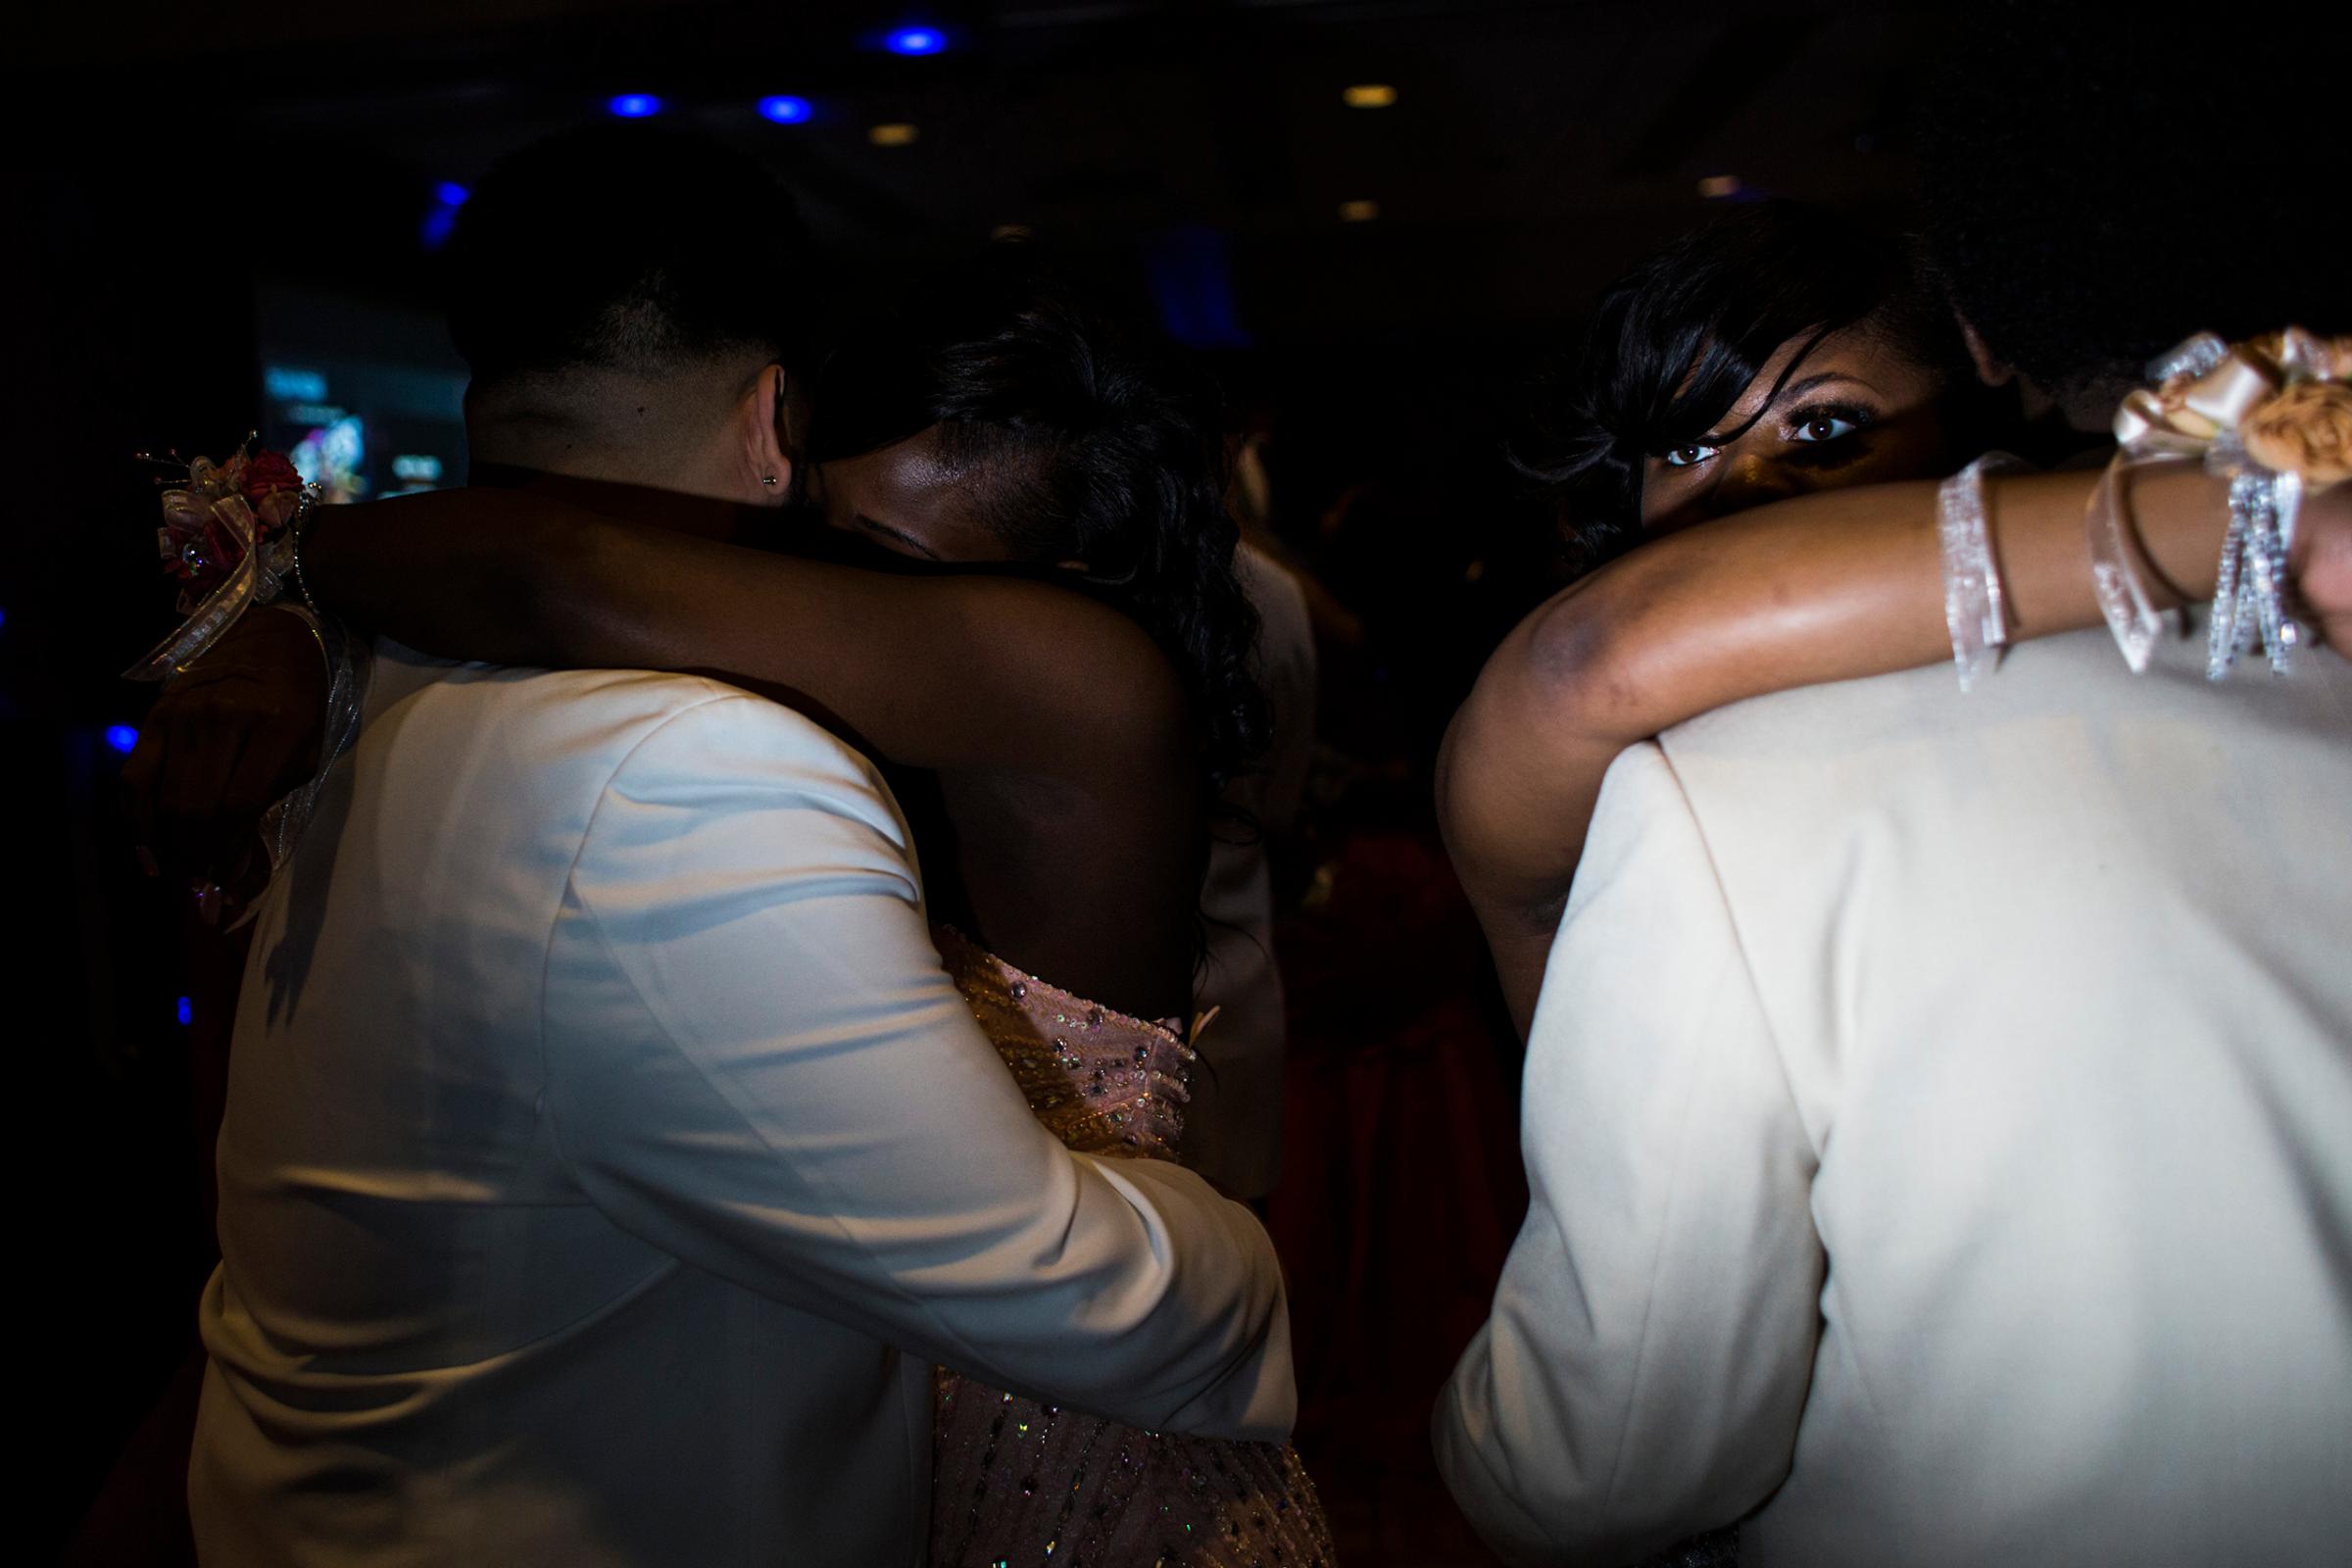 A Flint Southwestern Classical Academy student peers over her prom date's shoulder during a slow dance at the University of Michigan-Flint campus in downtown Flint, May 7, 2016. The theme was "Masquerade."